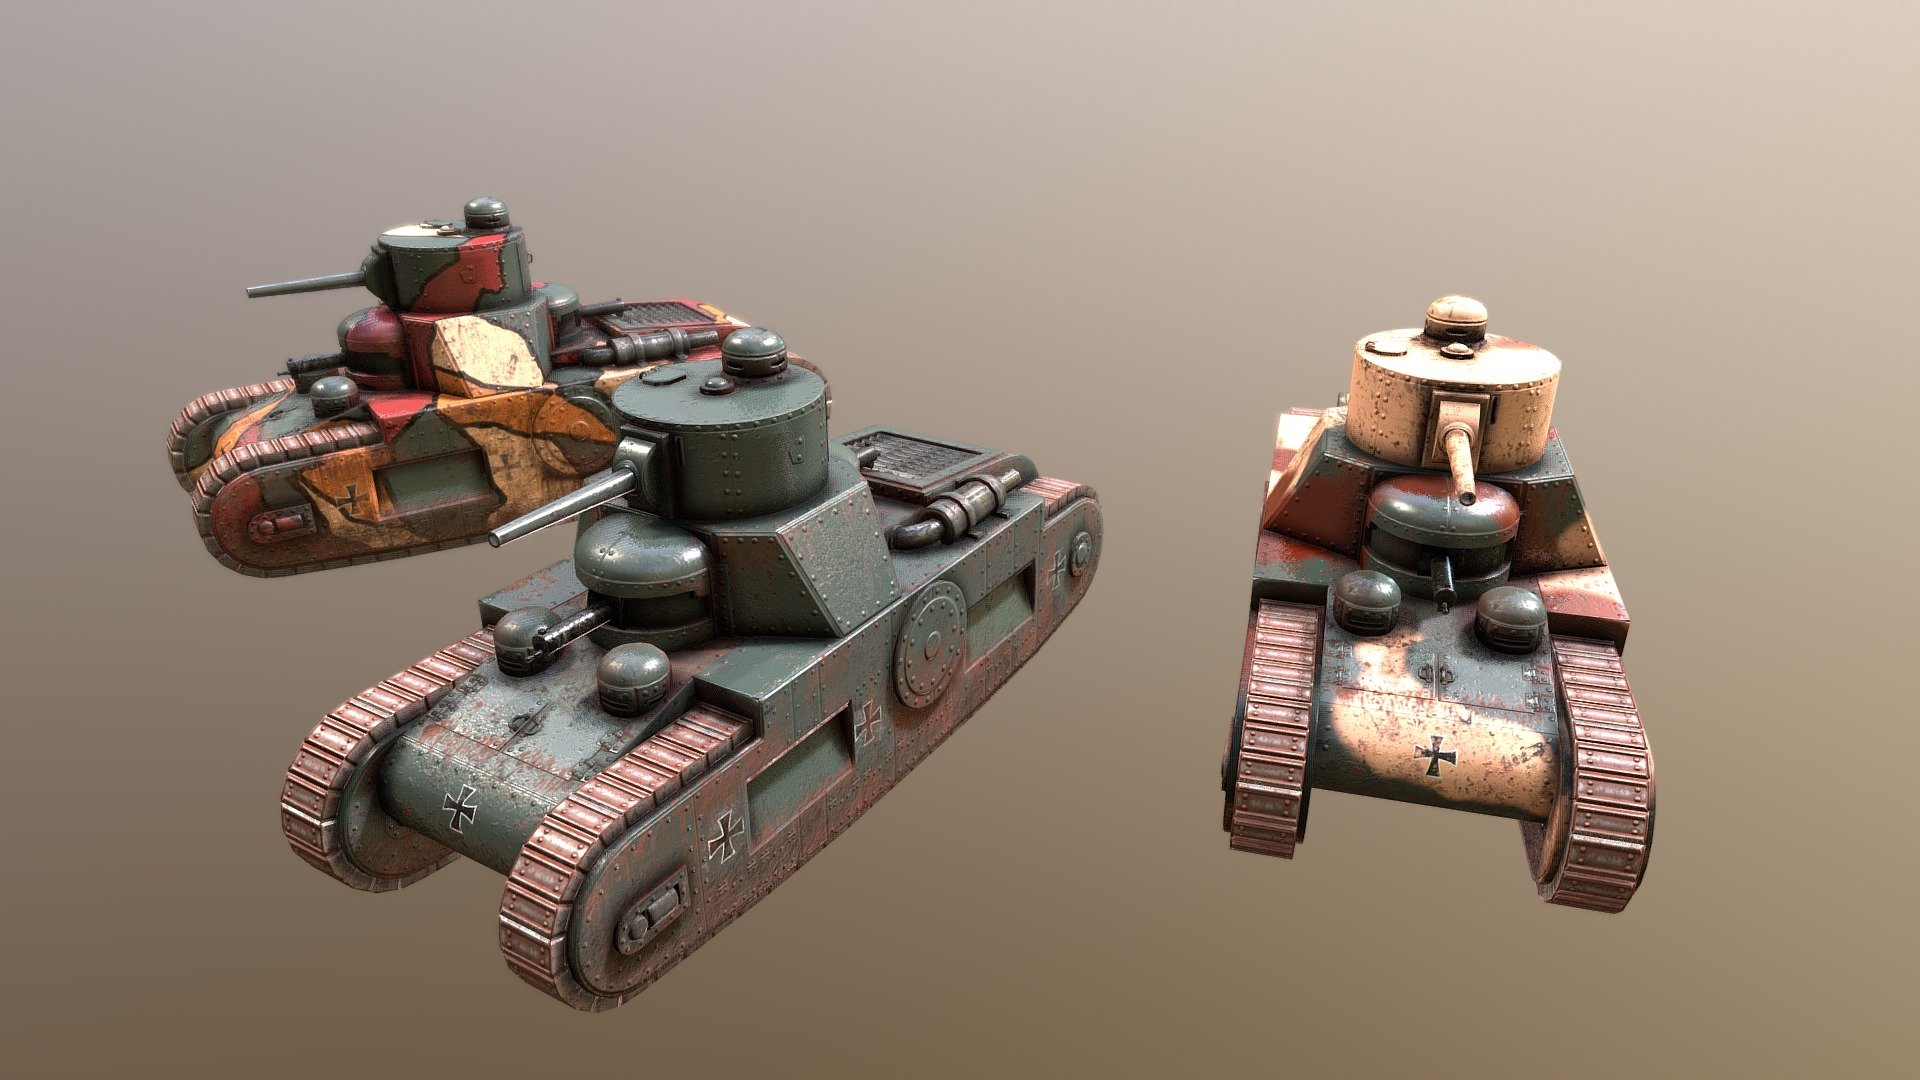 Tank based on a never-completed WWI German design. Designed with an RTS in mind, to be used as part of a pitch for a game concept.

Armed with a 47mm cannon and two MG-08 machine guns in front and rear casemates.

Follow me on Twitter, Tumblr and Artstation - Sturmpanzerwagen - 3D model by henskelion 3d model